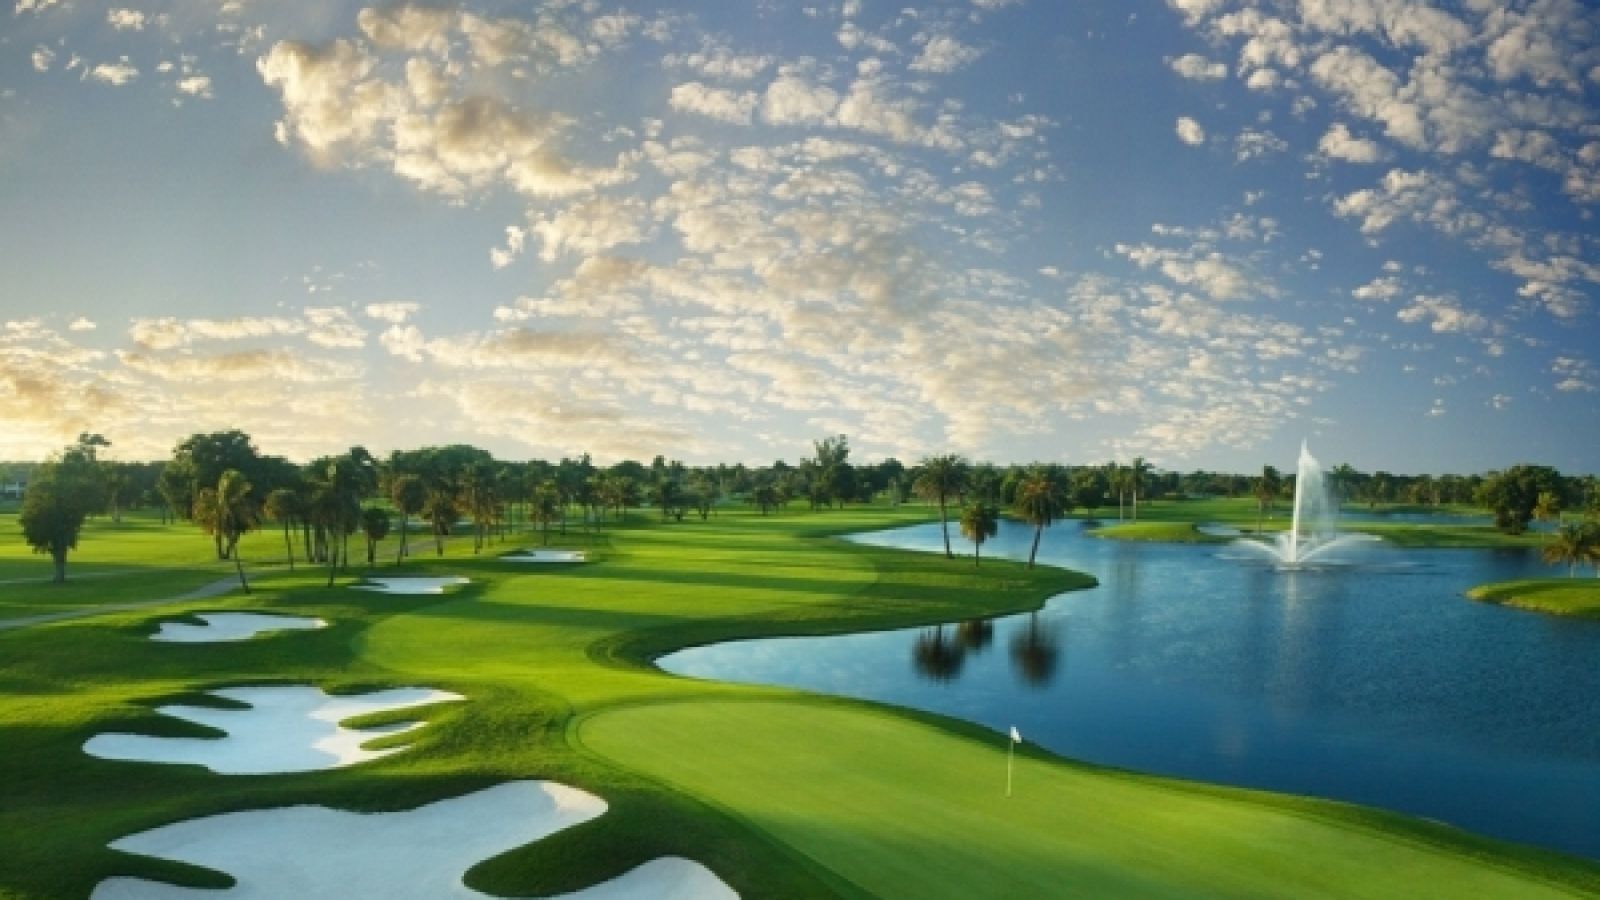 Trump National Doral Miami - Miami and South Florida golf packages